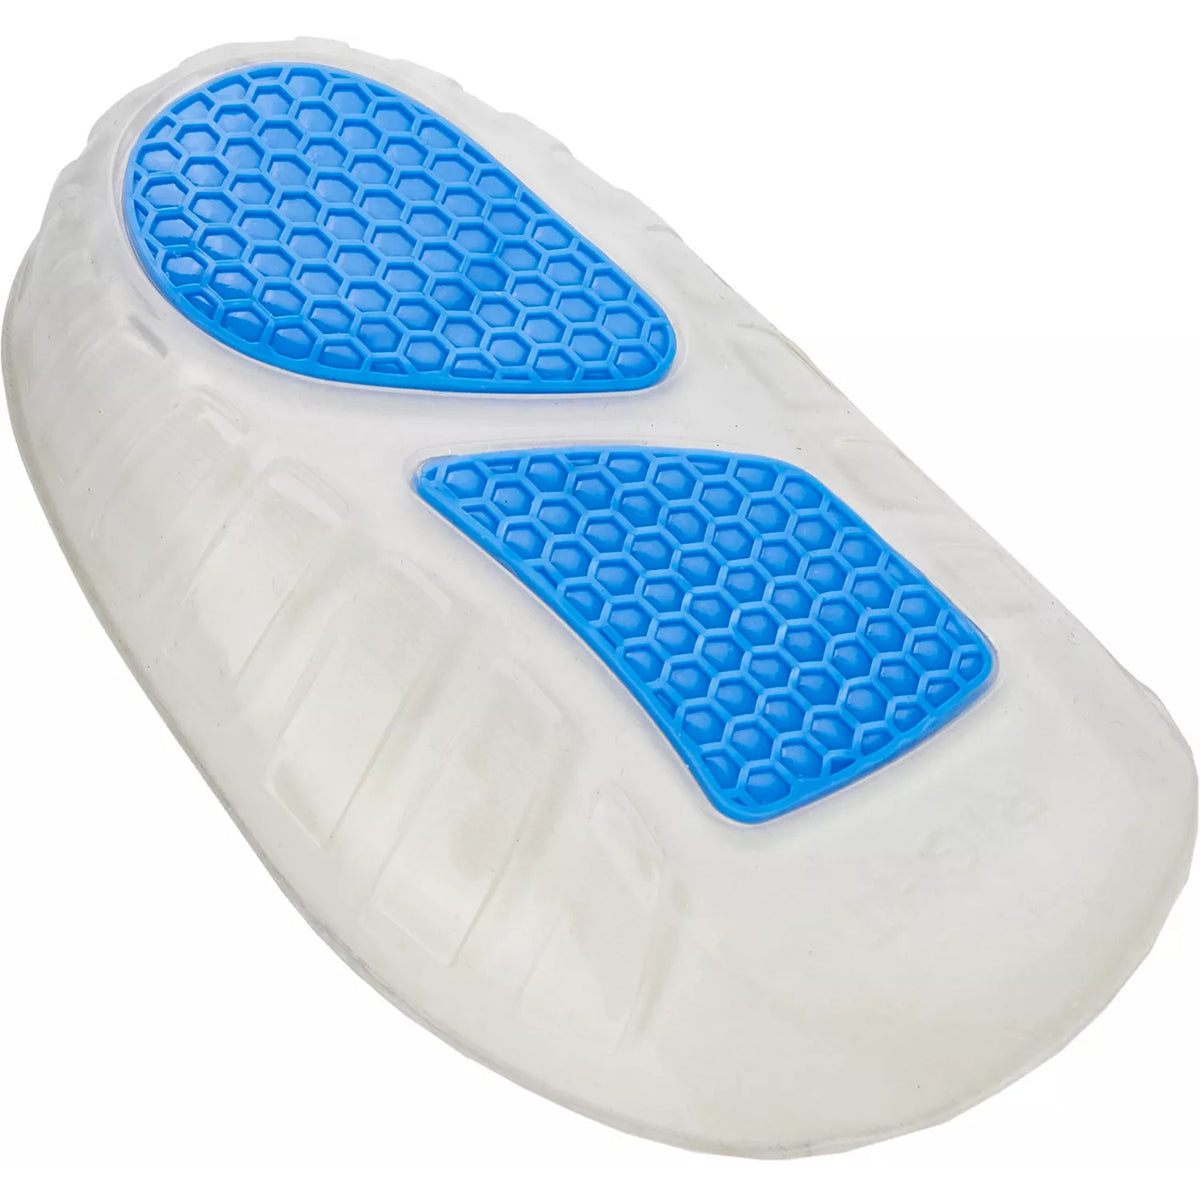 Sof Sole Gel Arch 3/4 Length Shoe Insoles with Memory Foam SofSole